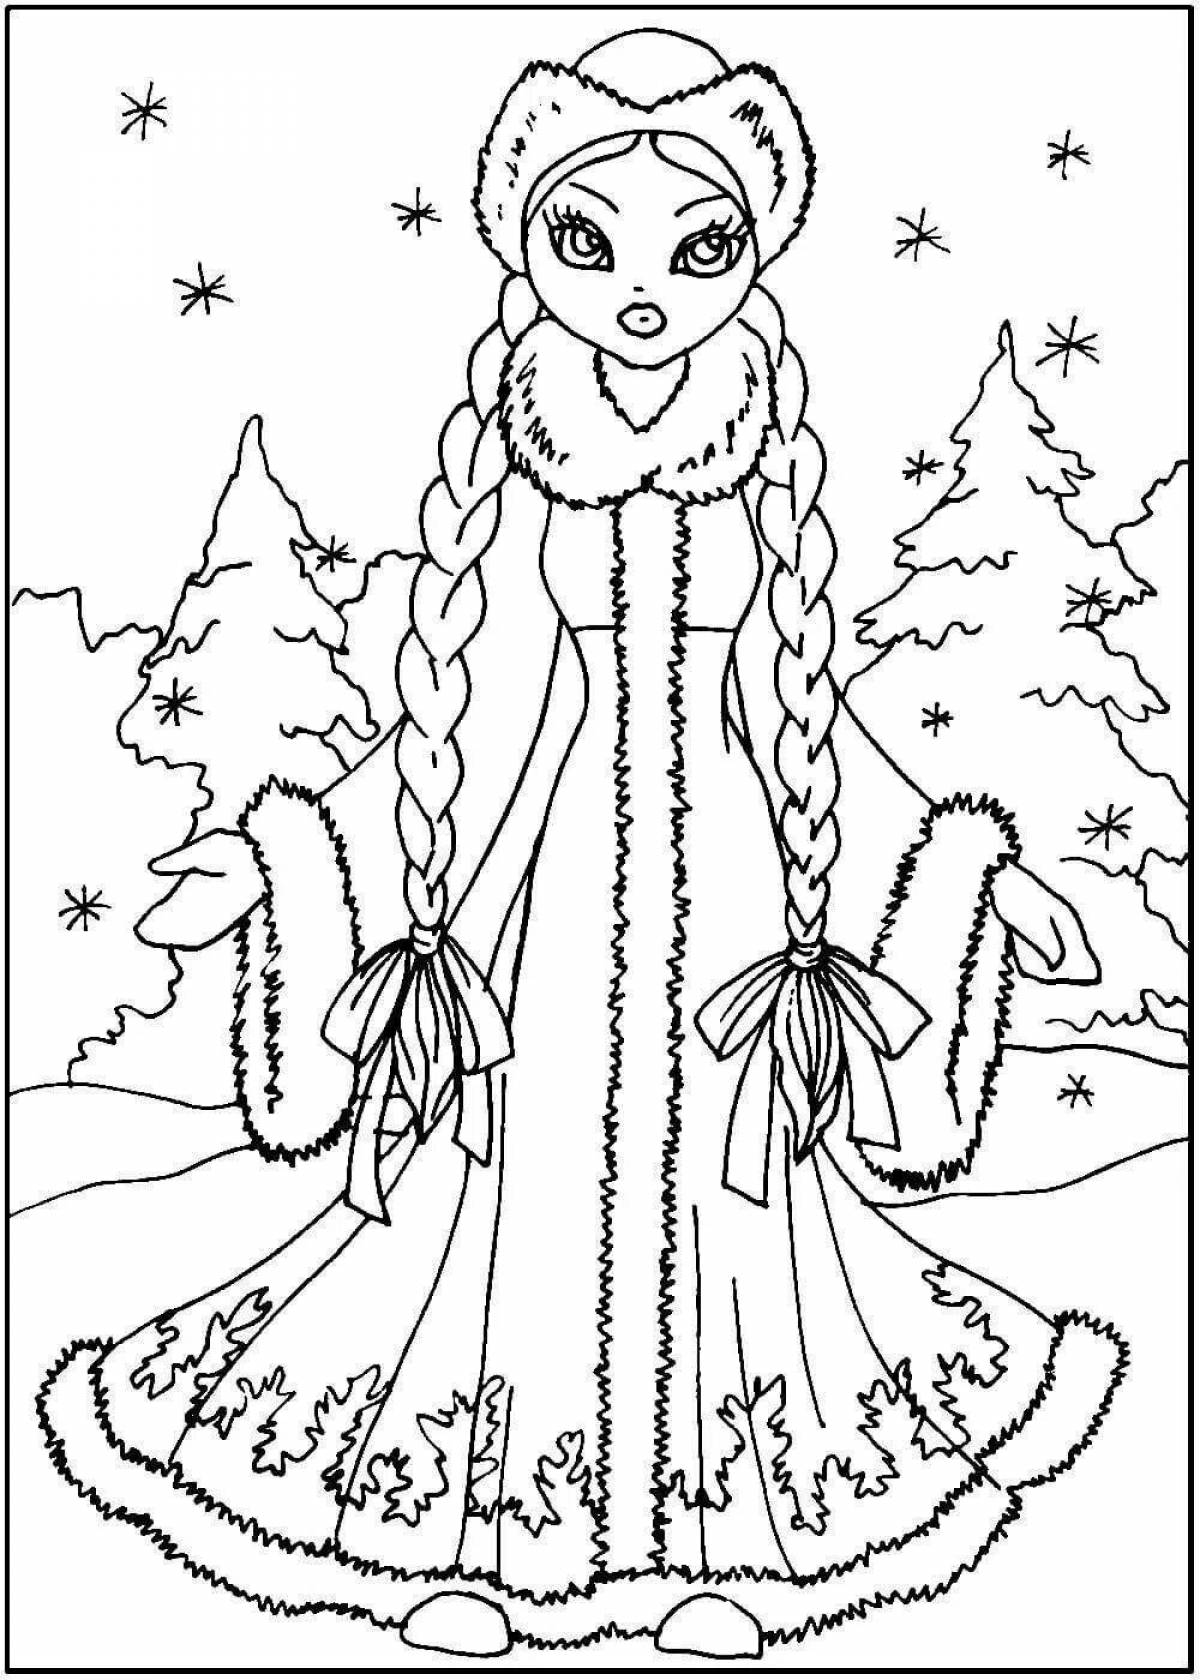 Exquisite snow maiden coloring book for girls